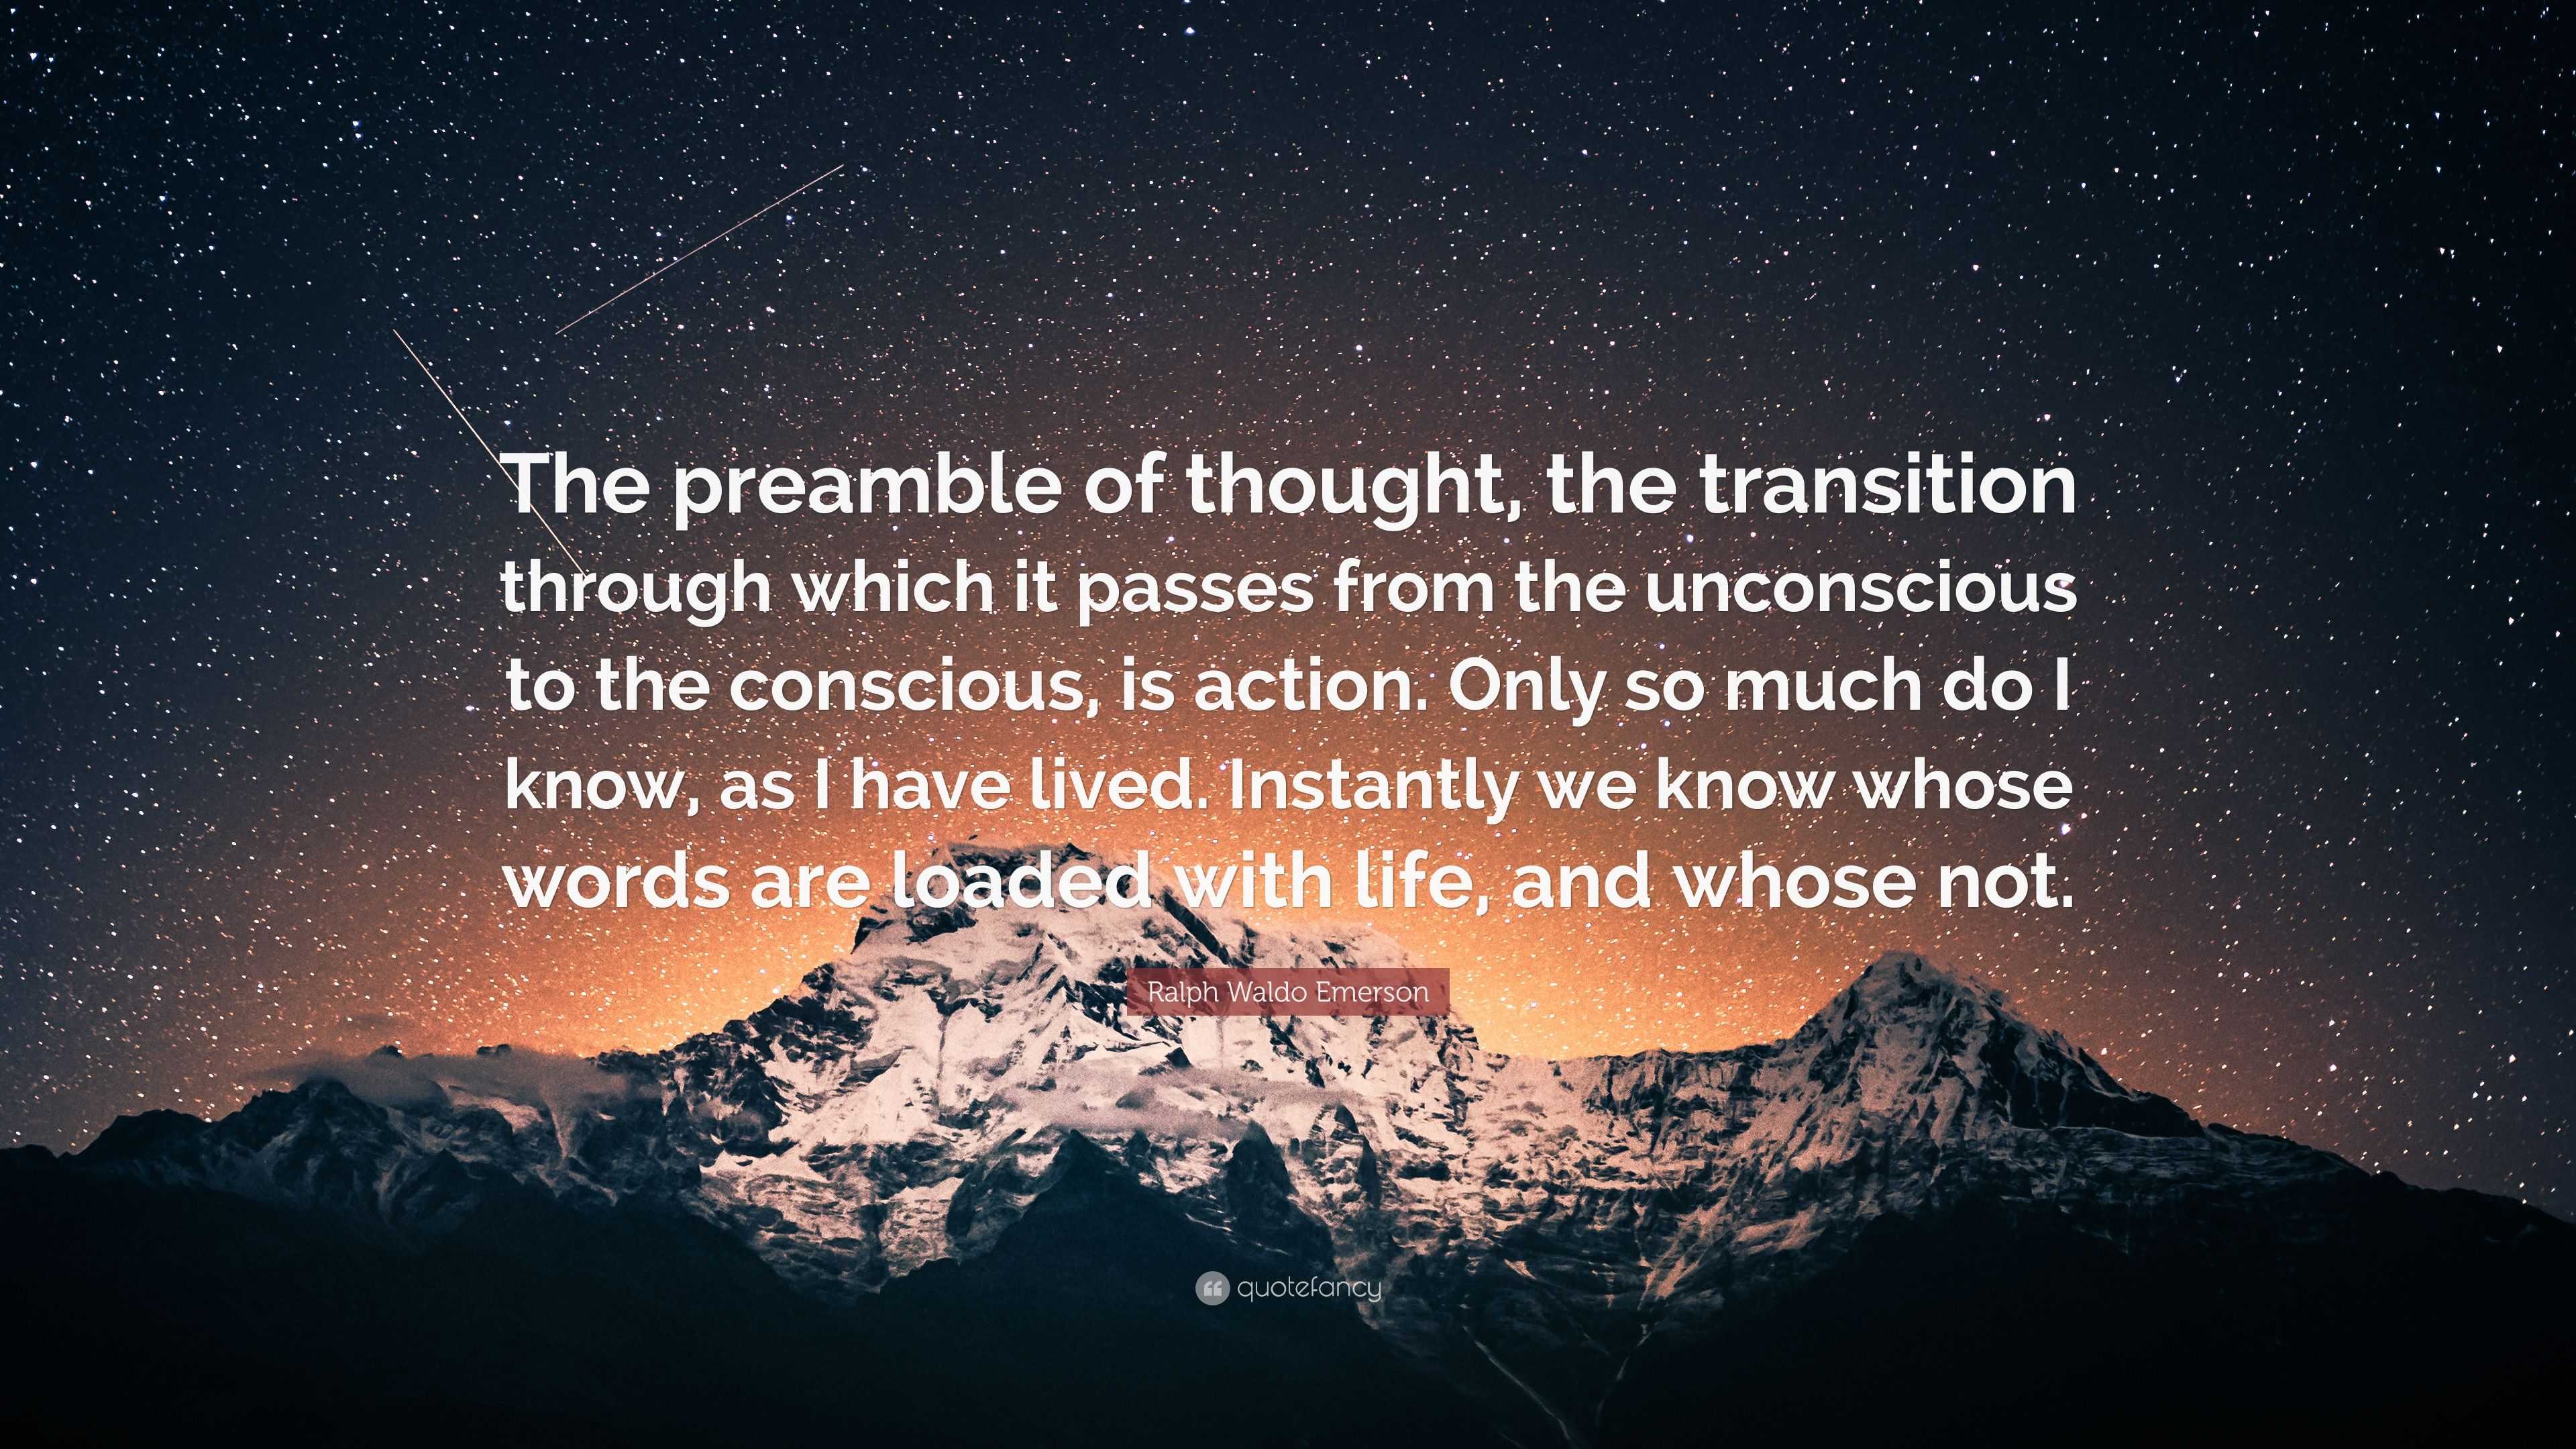 Ralph Waldo Emerson Quote: “The preamble of thought, the transition ...